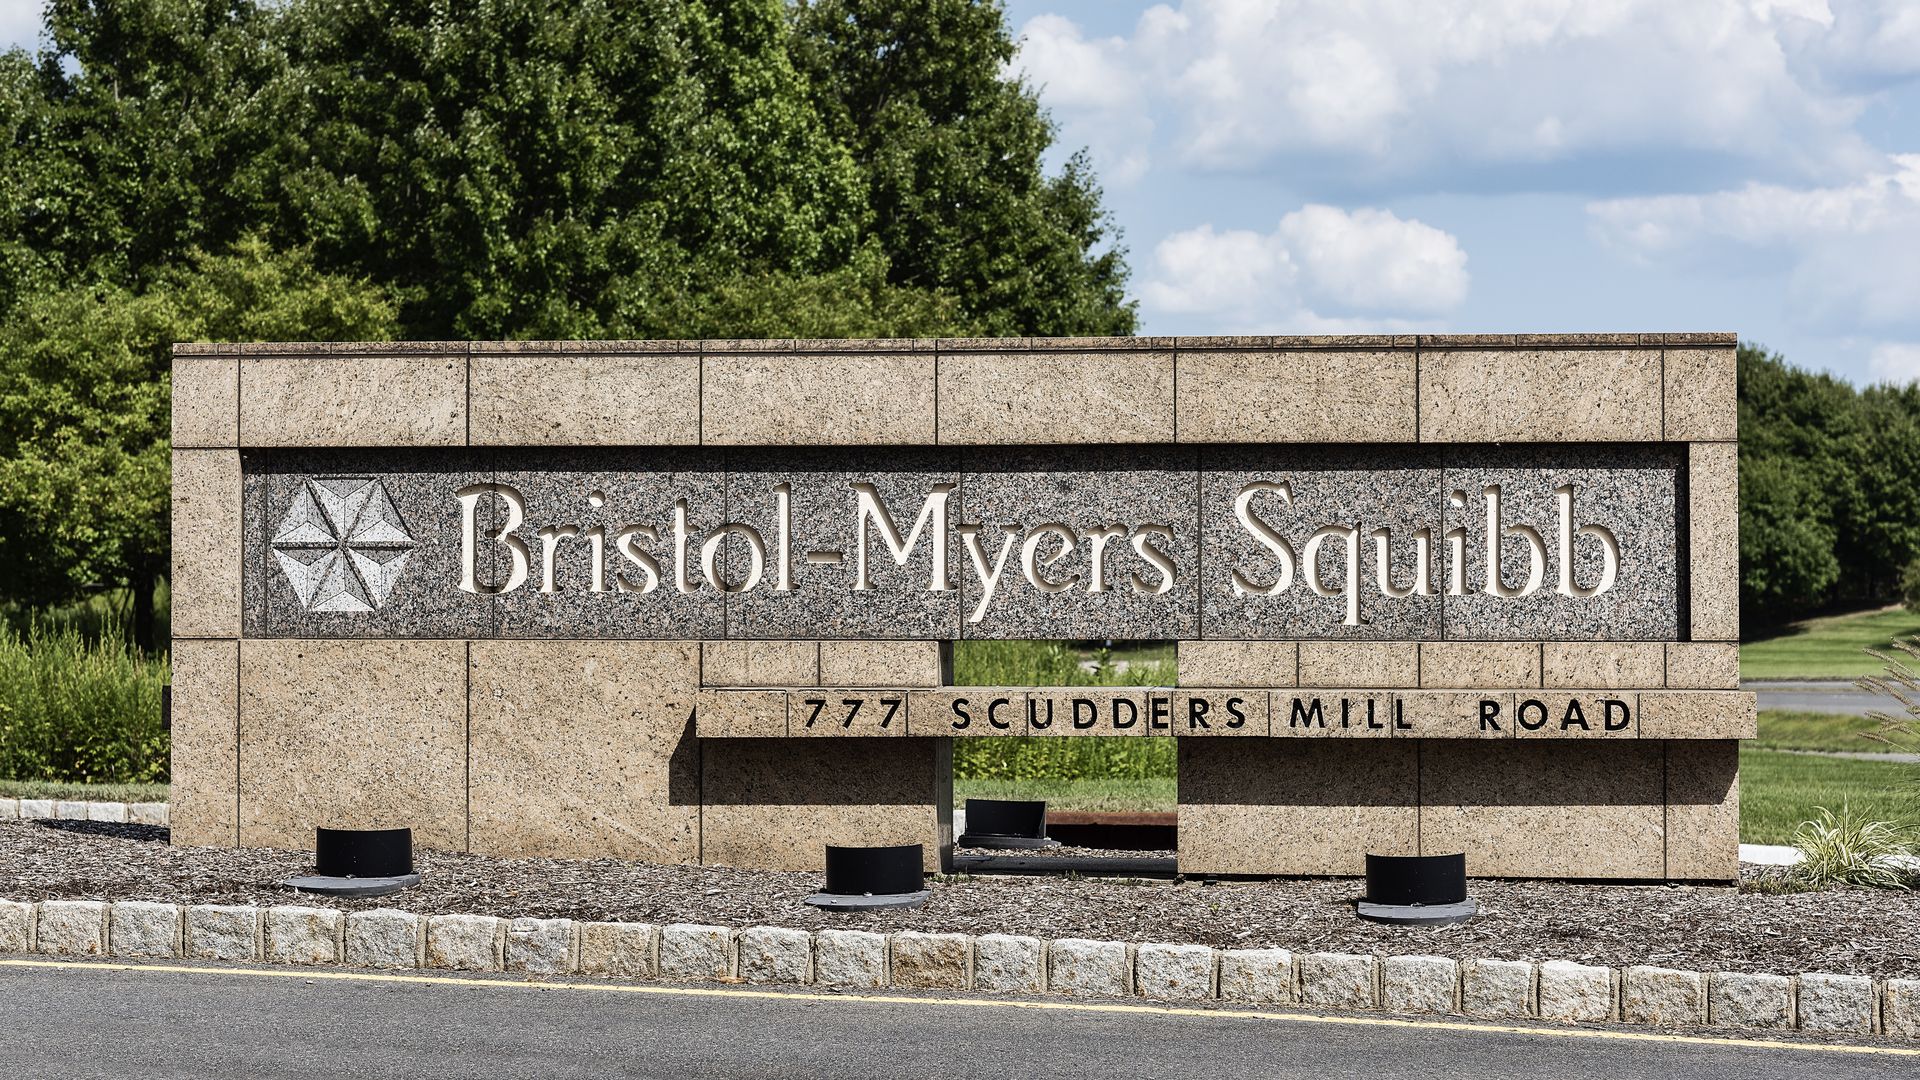 A sign with the Bristol-Myers Squibb name and logo.